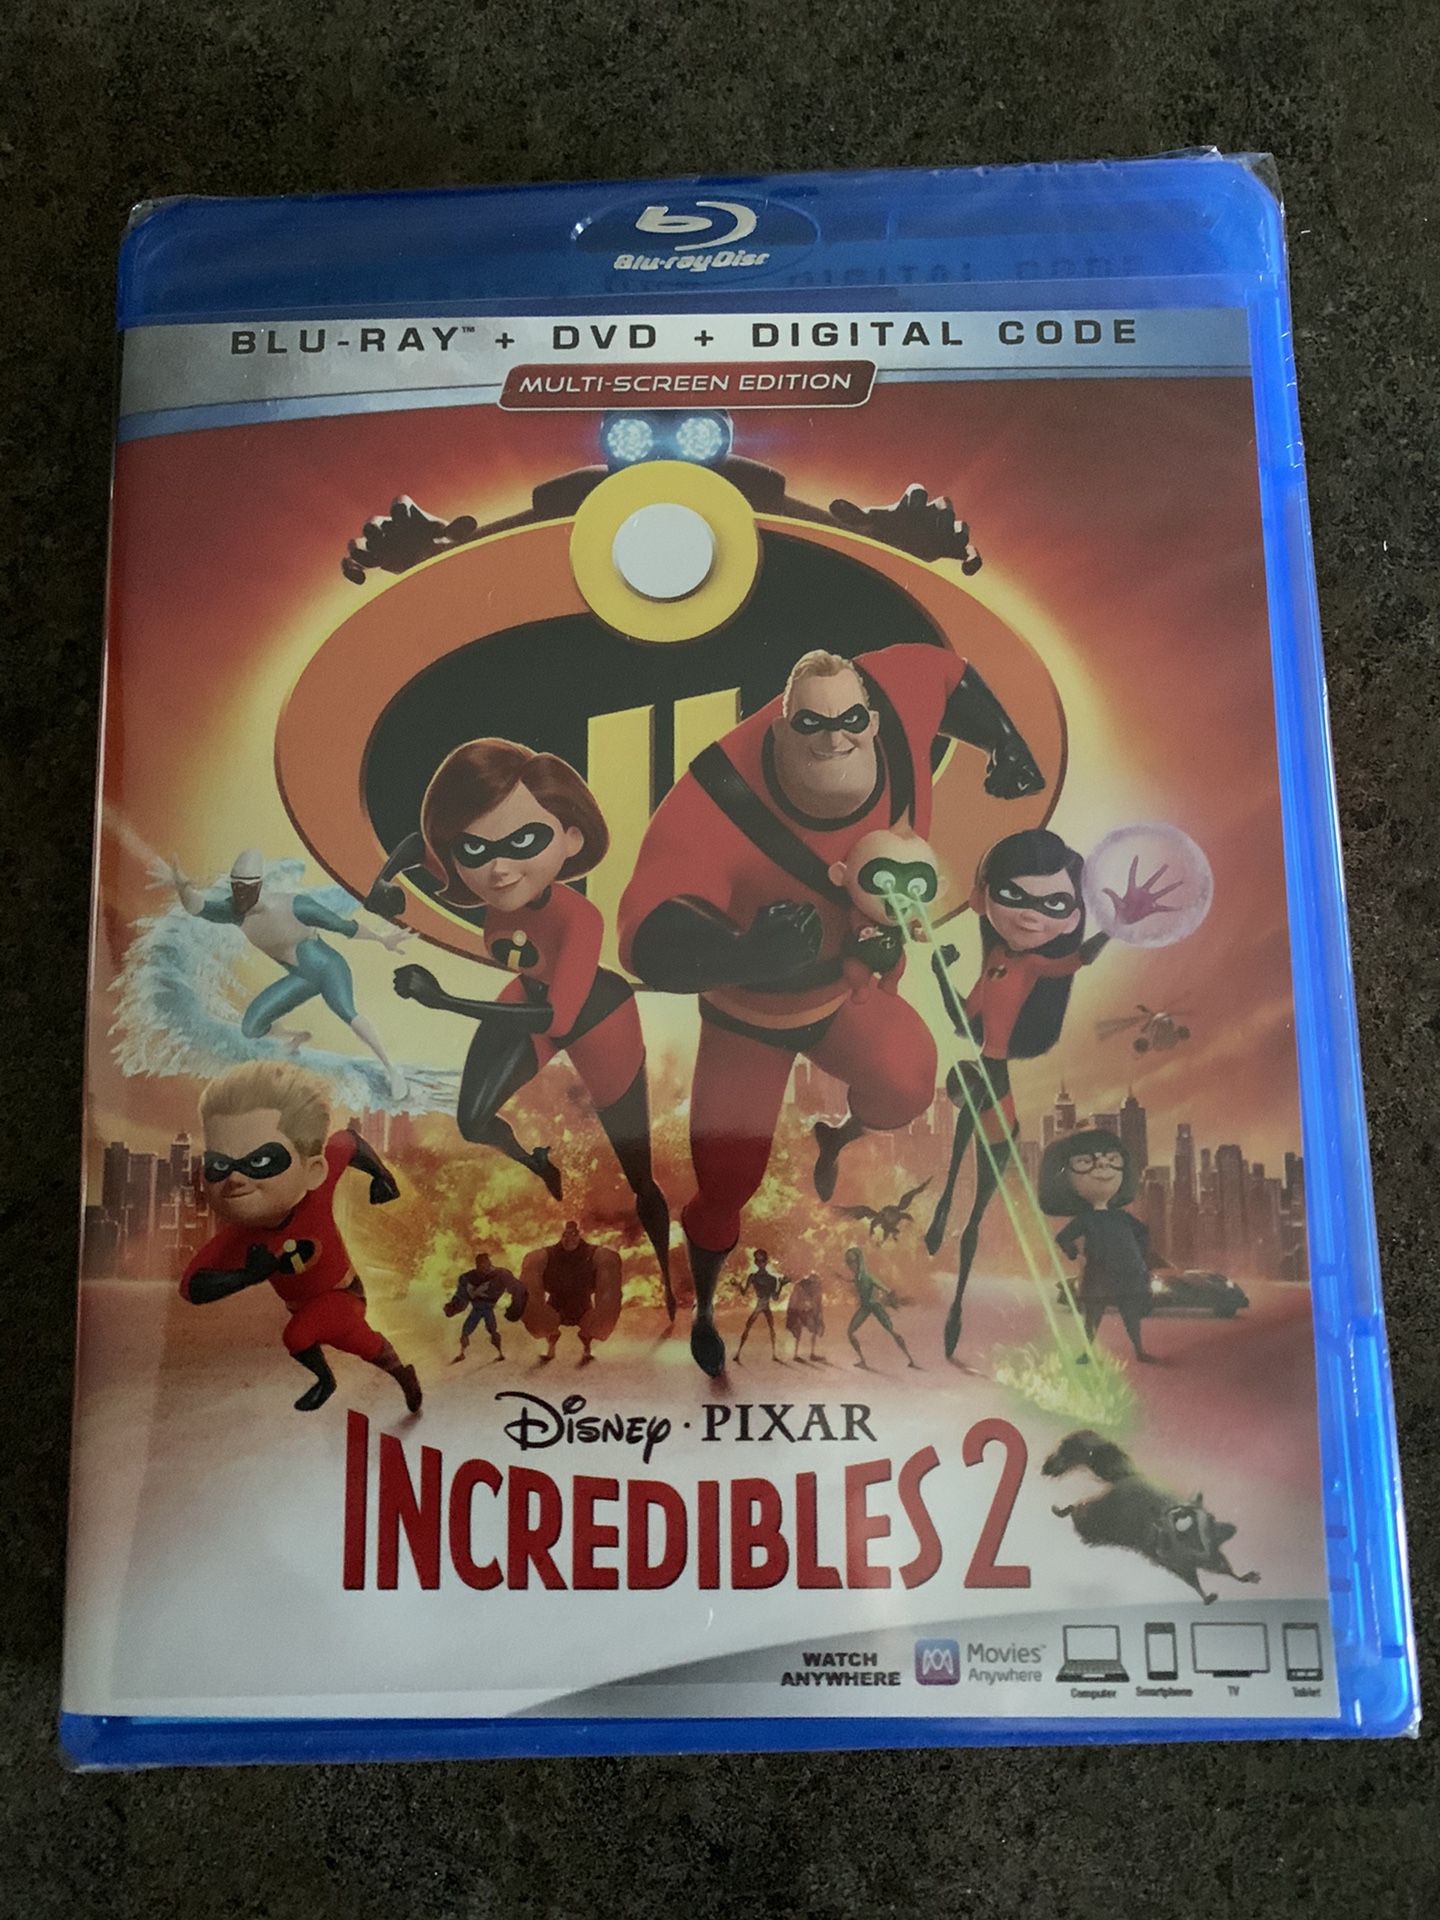 Blu-Ray DVD and Digital Copy of Incredibles 2